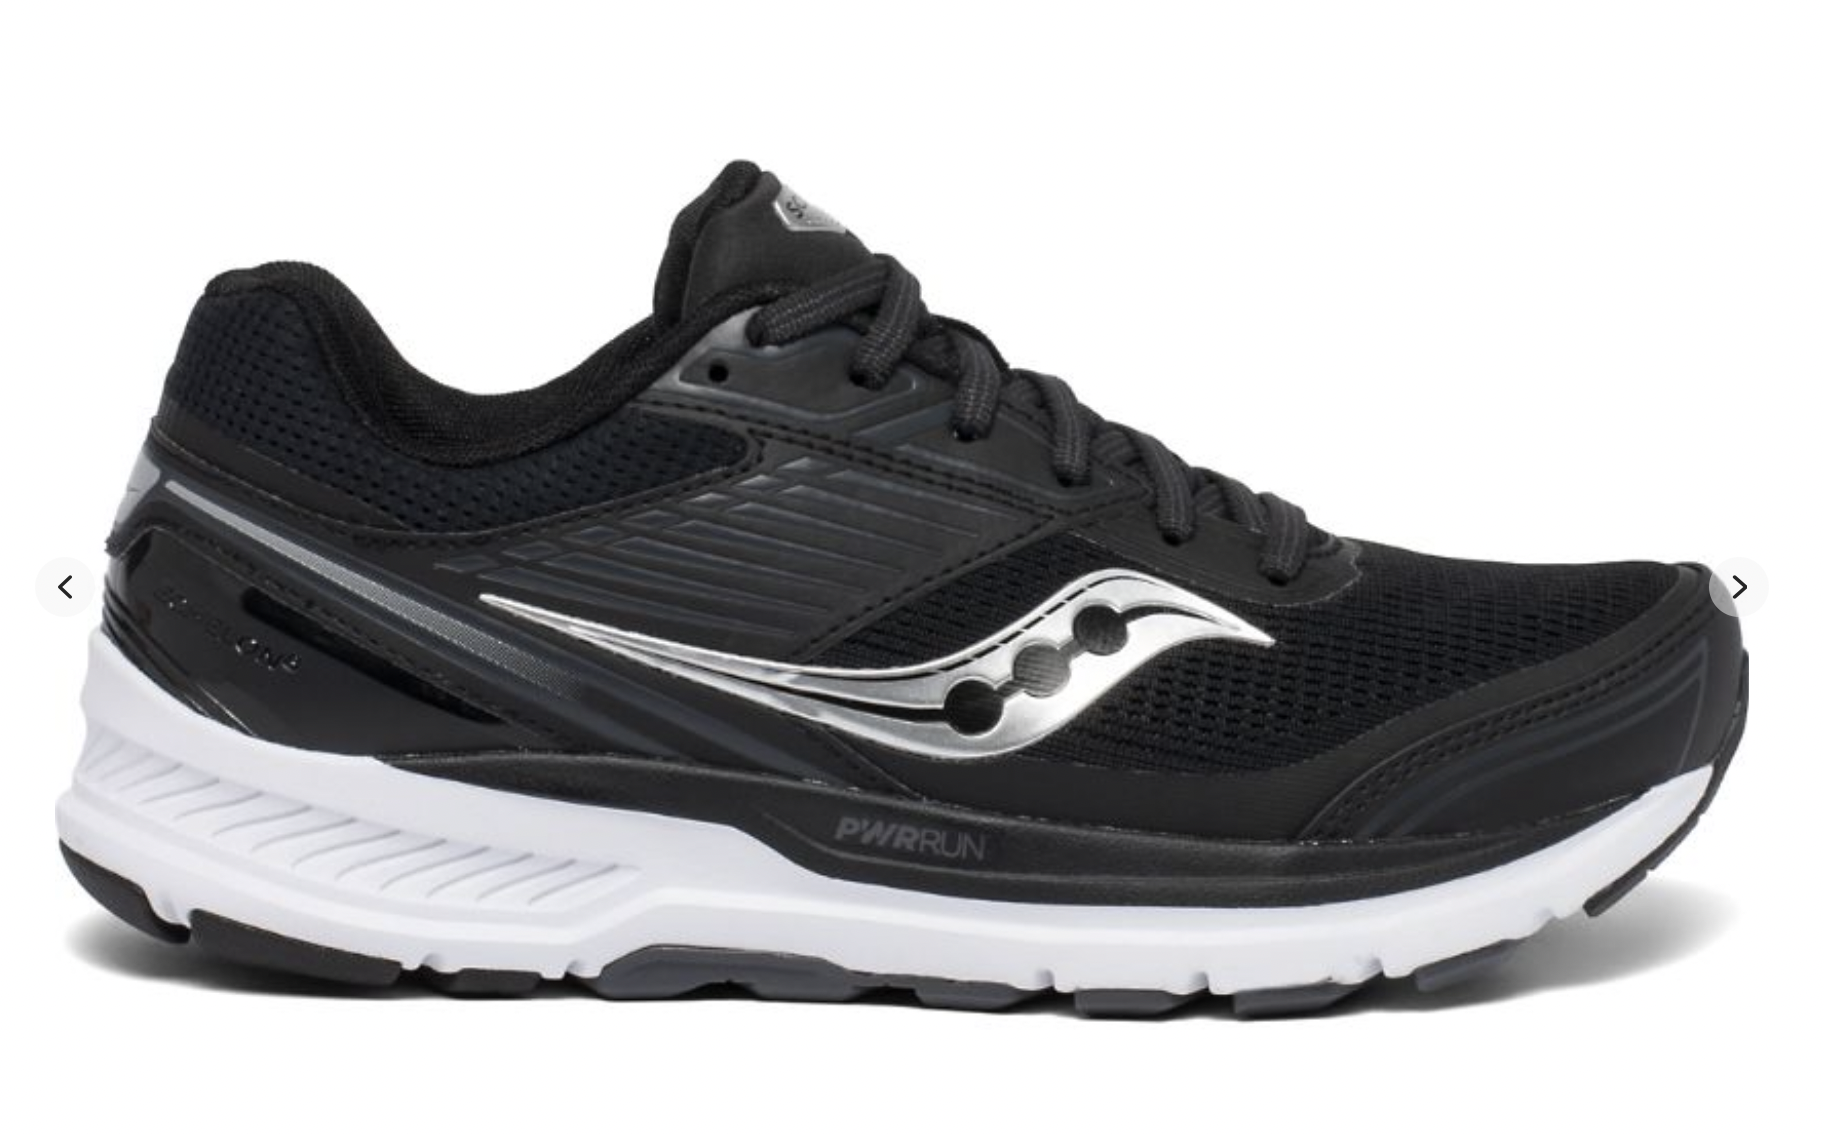 Saucony: Echelon 8 Running Shoes for .98